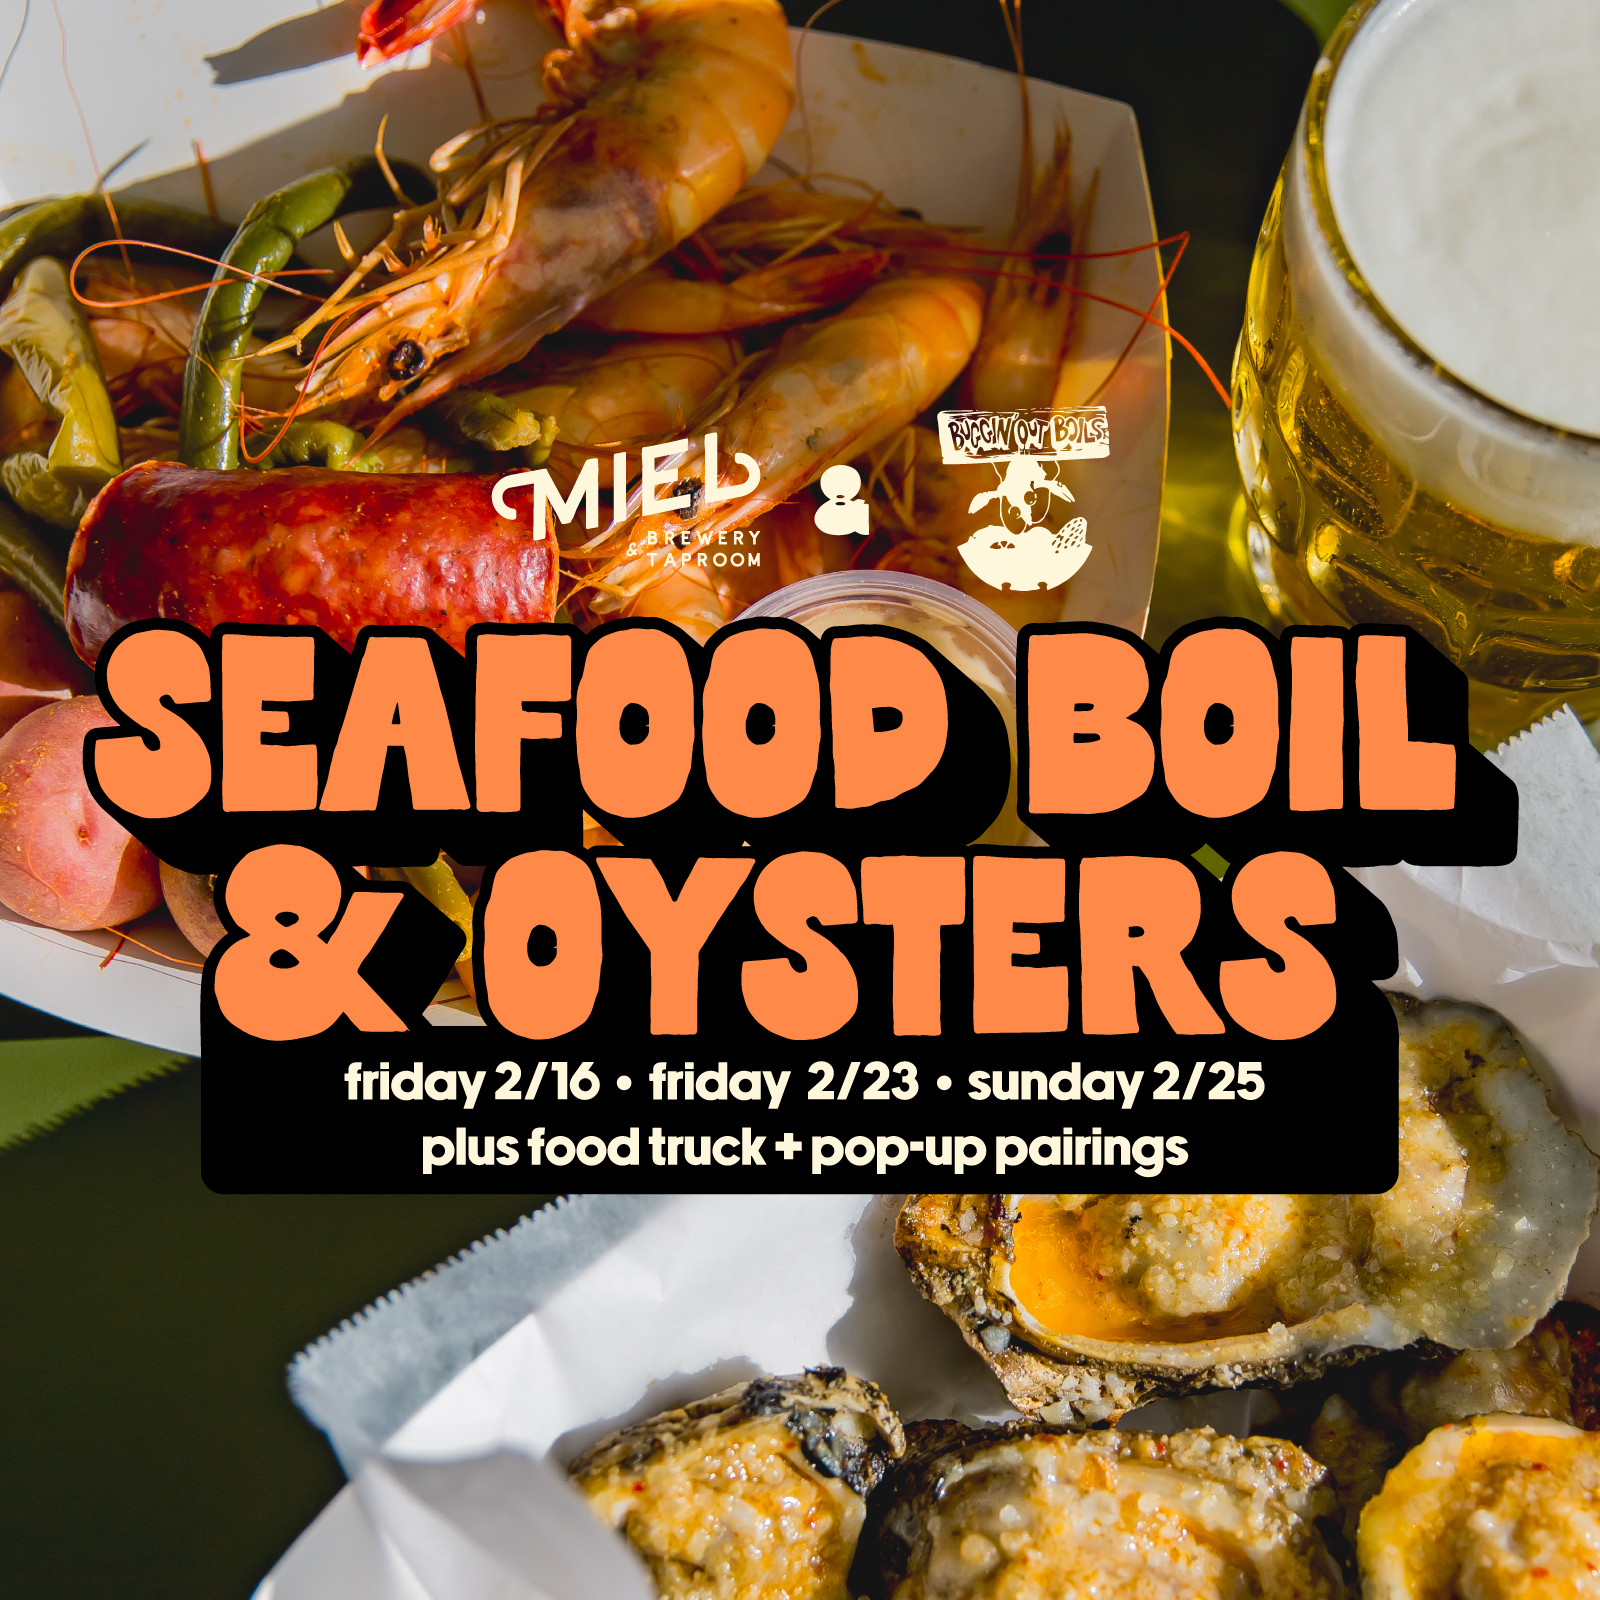 Buggin’ out boils seafood boil + grilled oysters flyer